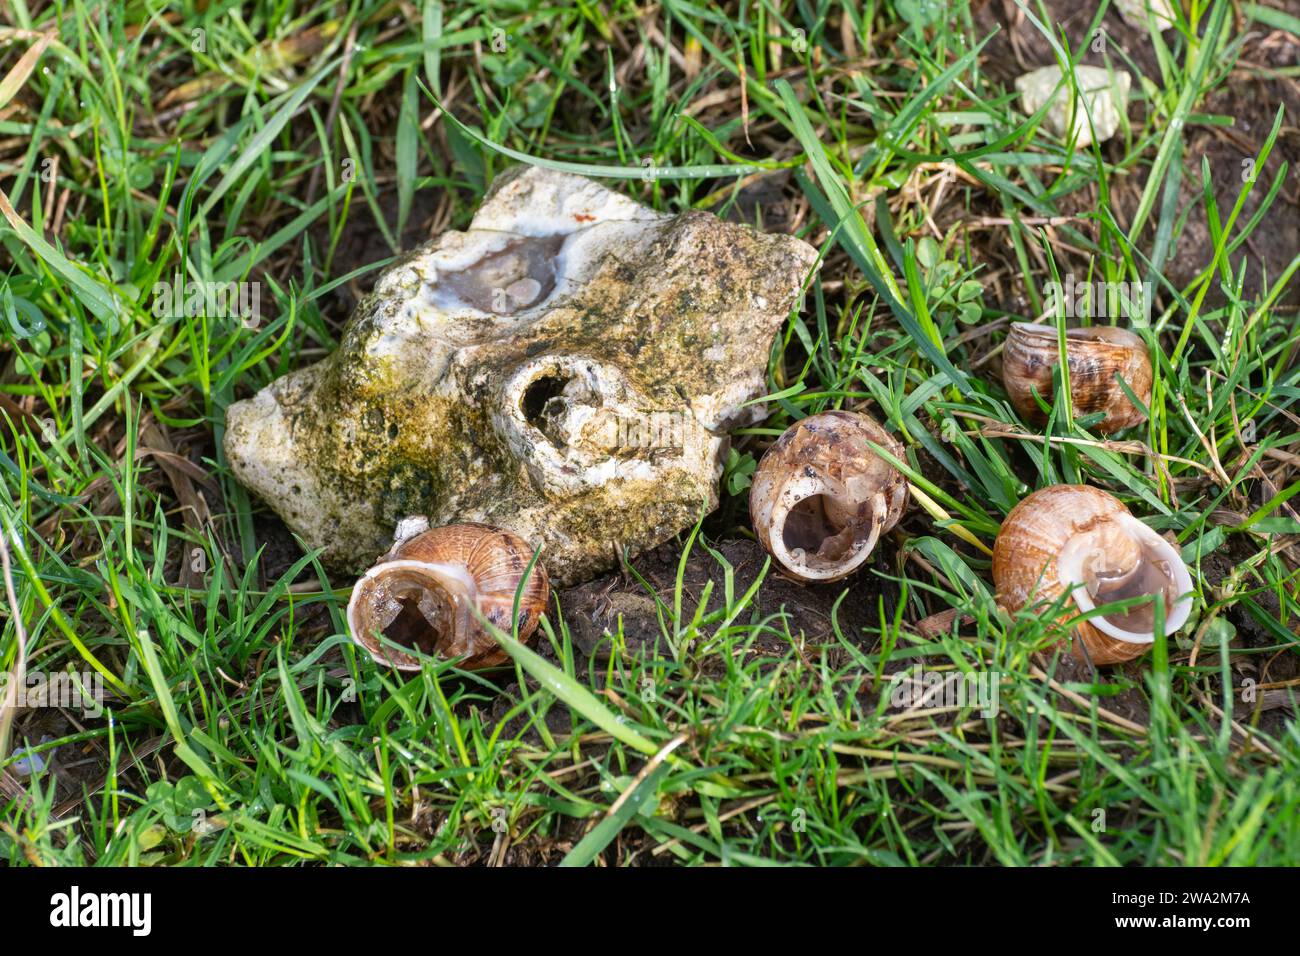 Empty snail shells possibly eaten by a song thrush lying next to a stone in grass, UK Stock Photo